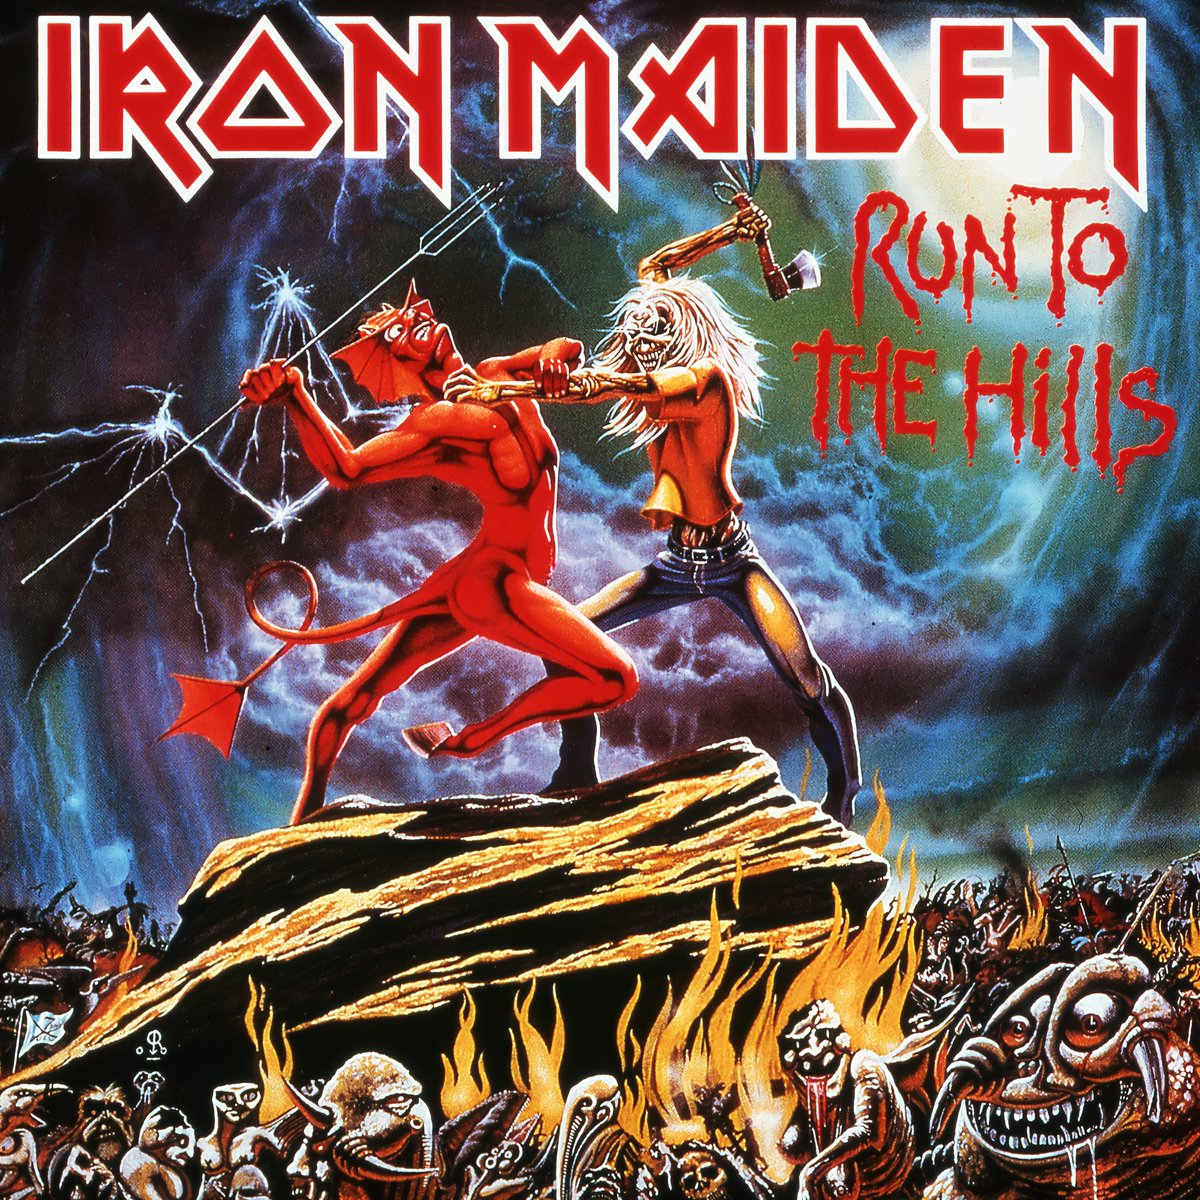 Run to the Hills was released 42 years ago today! How old were you when you first heard it? #MusicMonday #IronMaiden #RunToTheHills